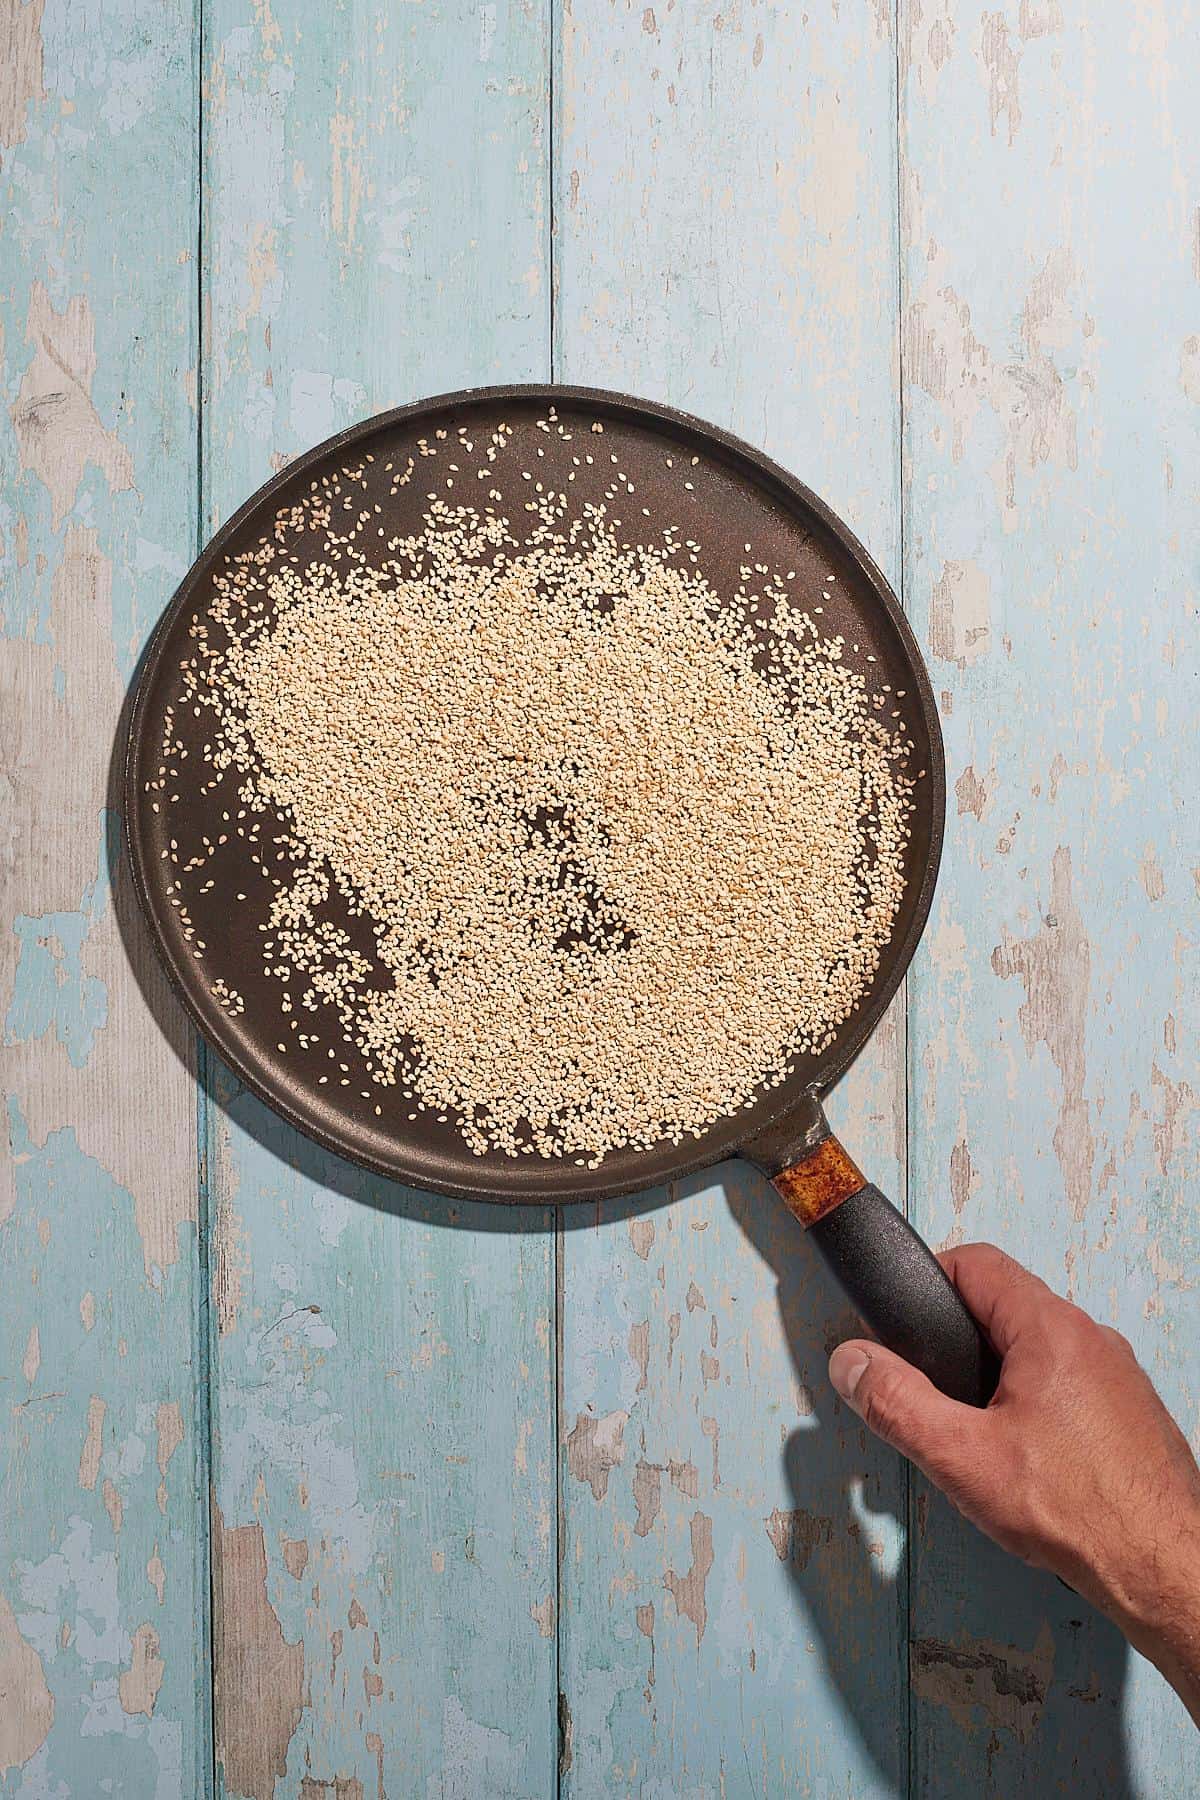 sesame seeds being toasted in a pan